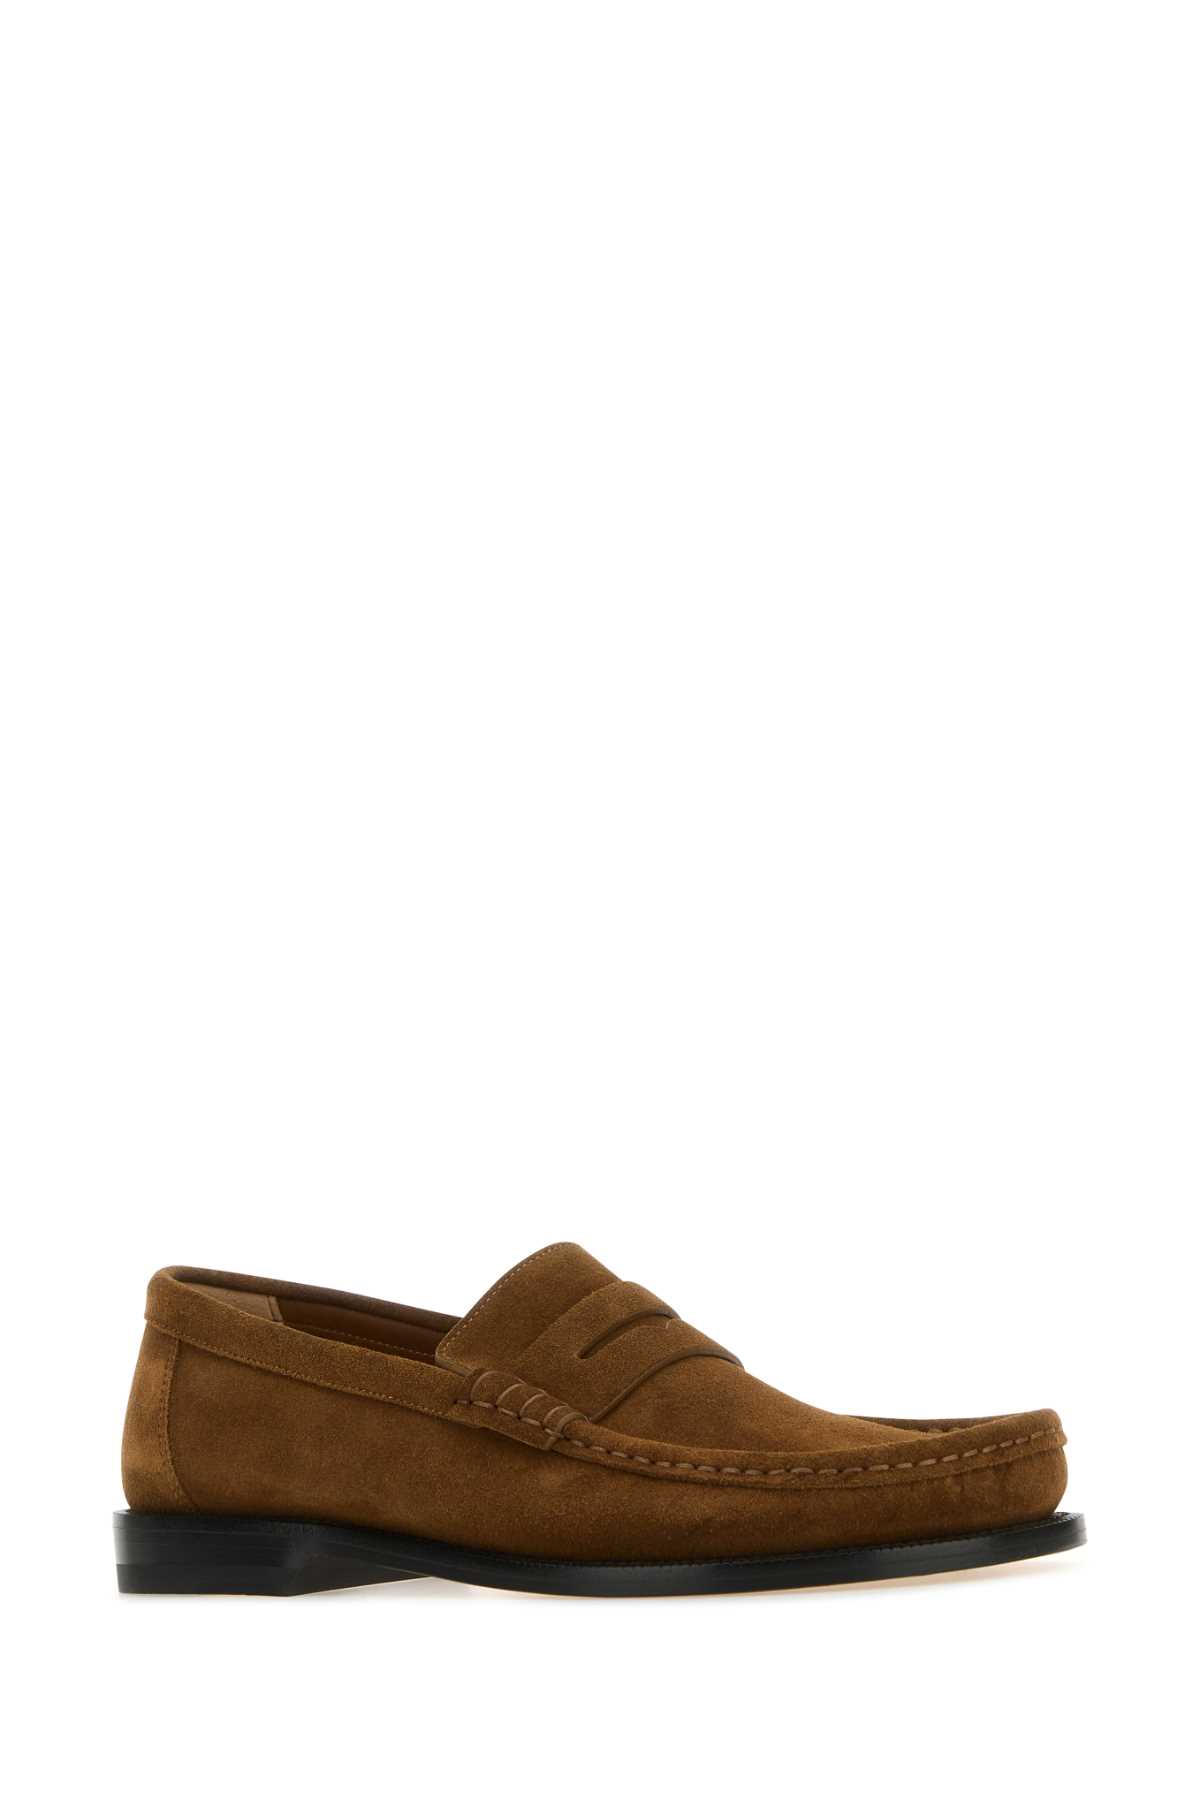 LOEWE BROWN SUEDE CAMPO LOAFERS